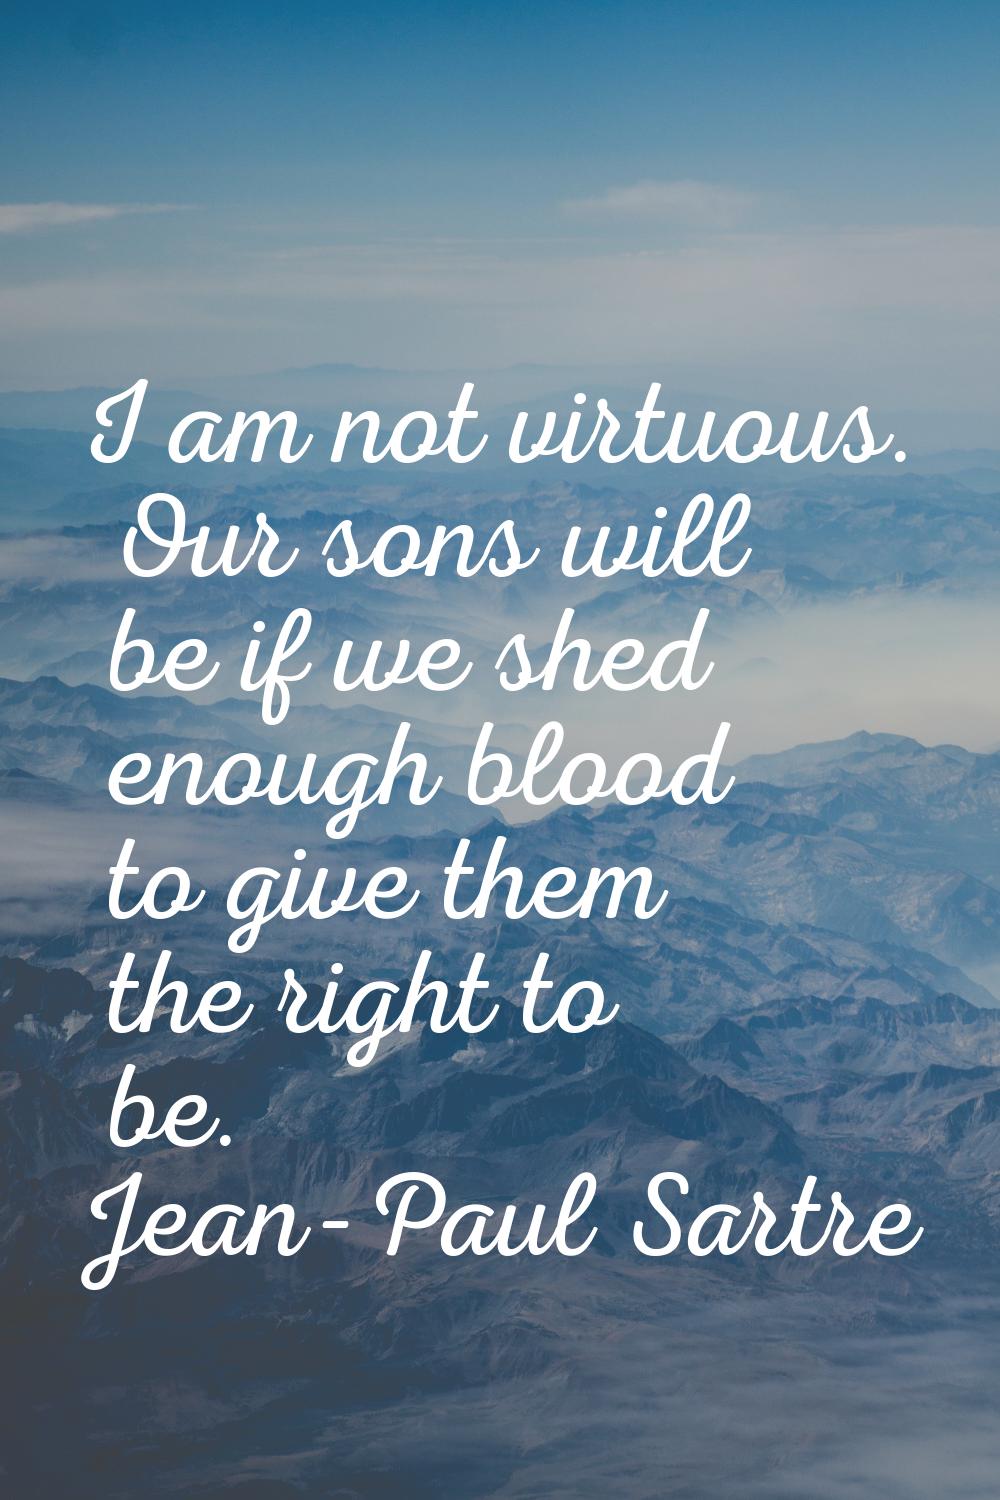 I am not virtuous. Our sons will be if we shed enough blood to give them the right to be.